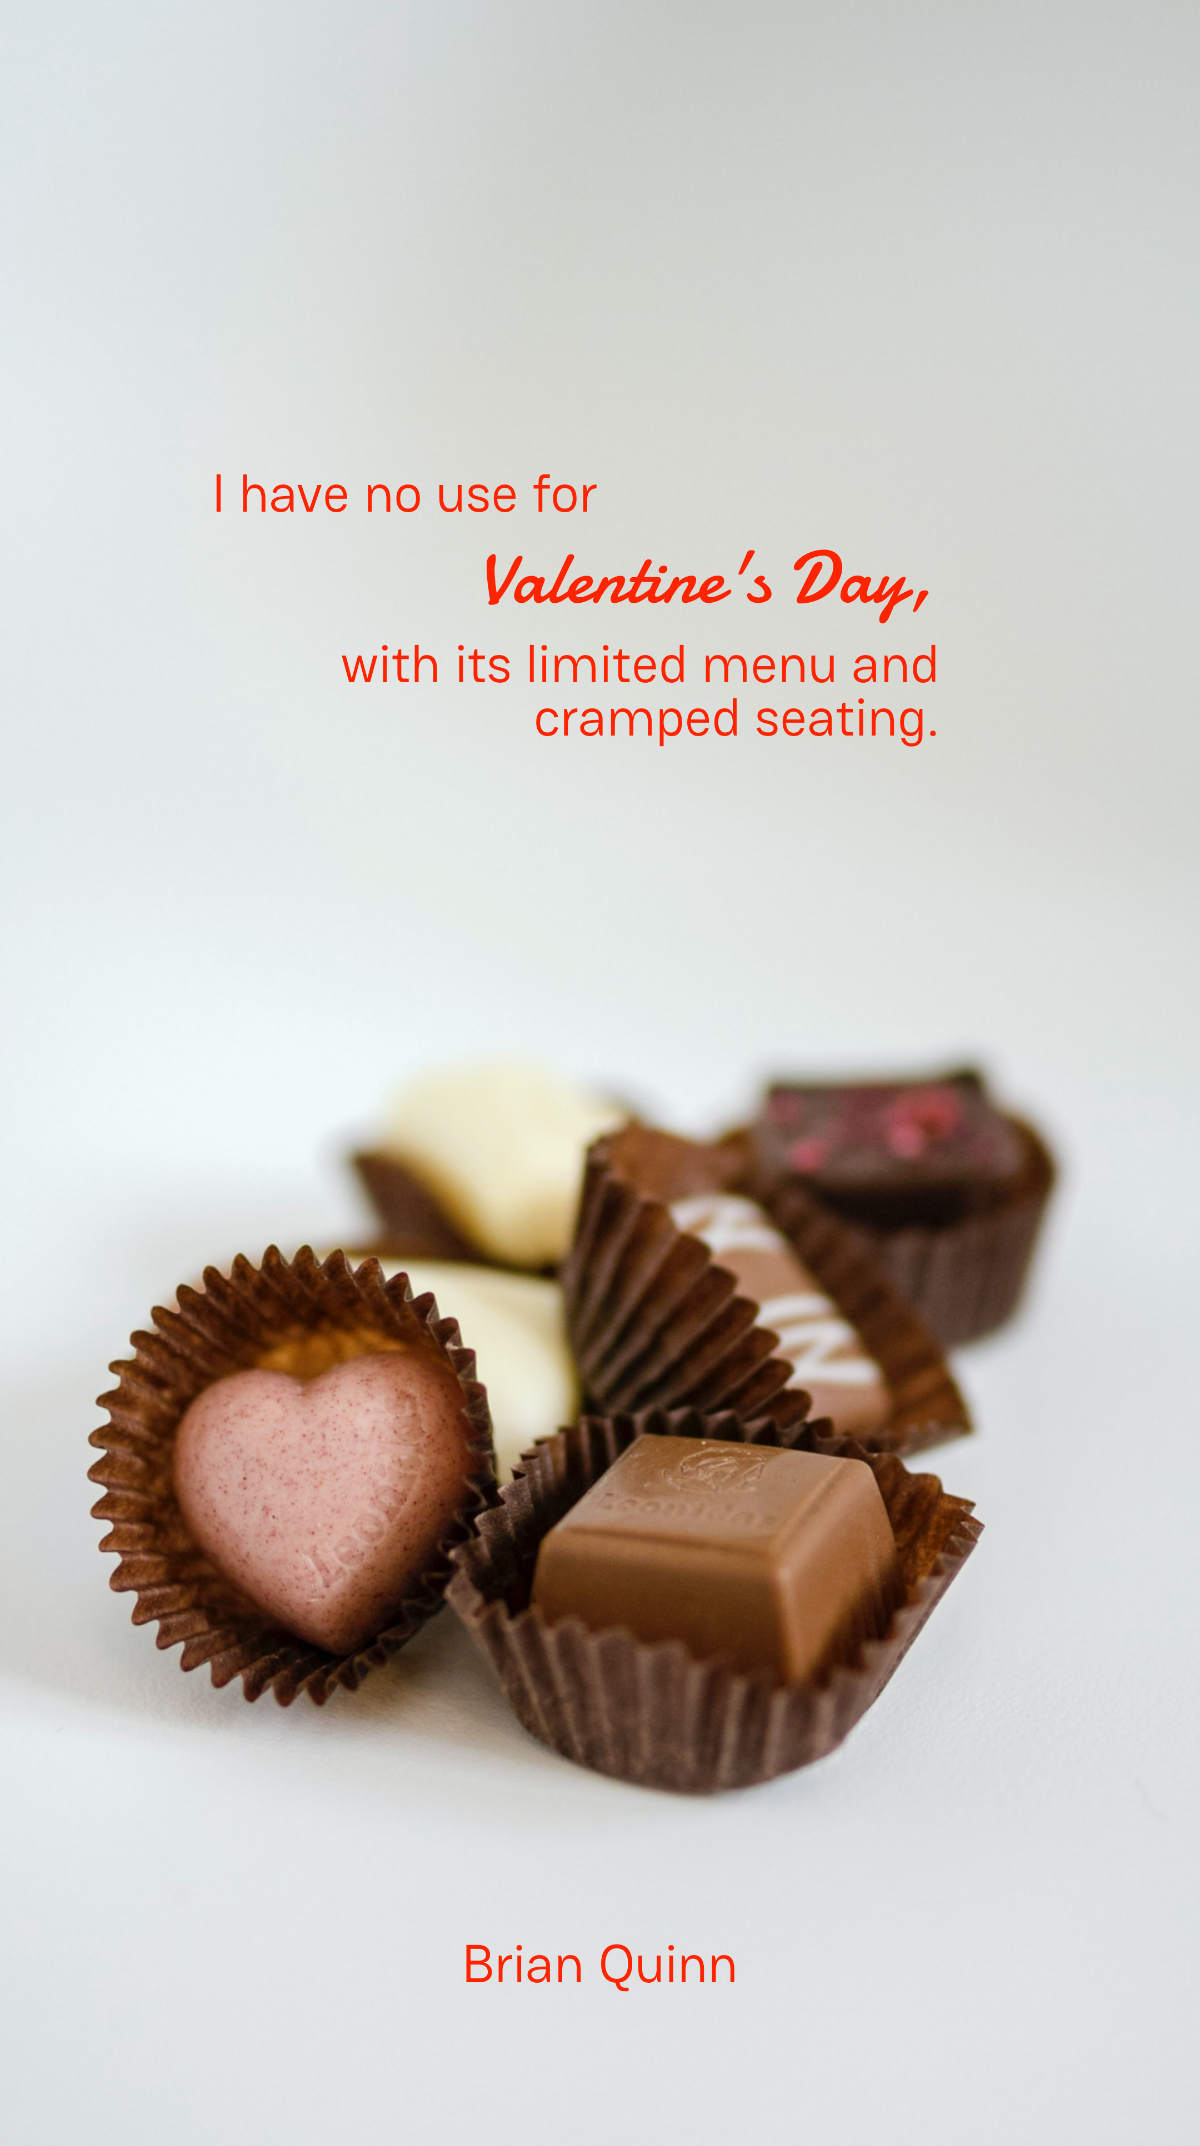 Brian Quinn - I have no use for Valentine's Day, with its limited menu and cramped seating. Template